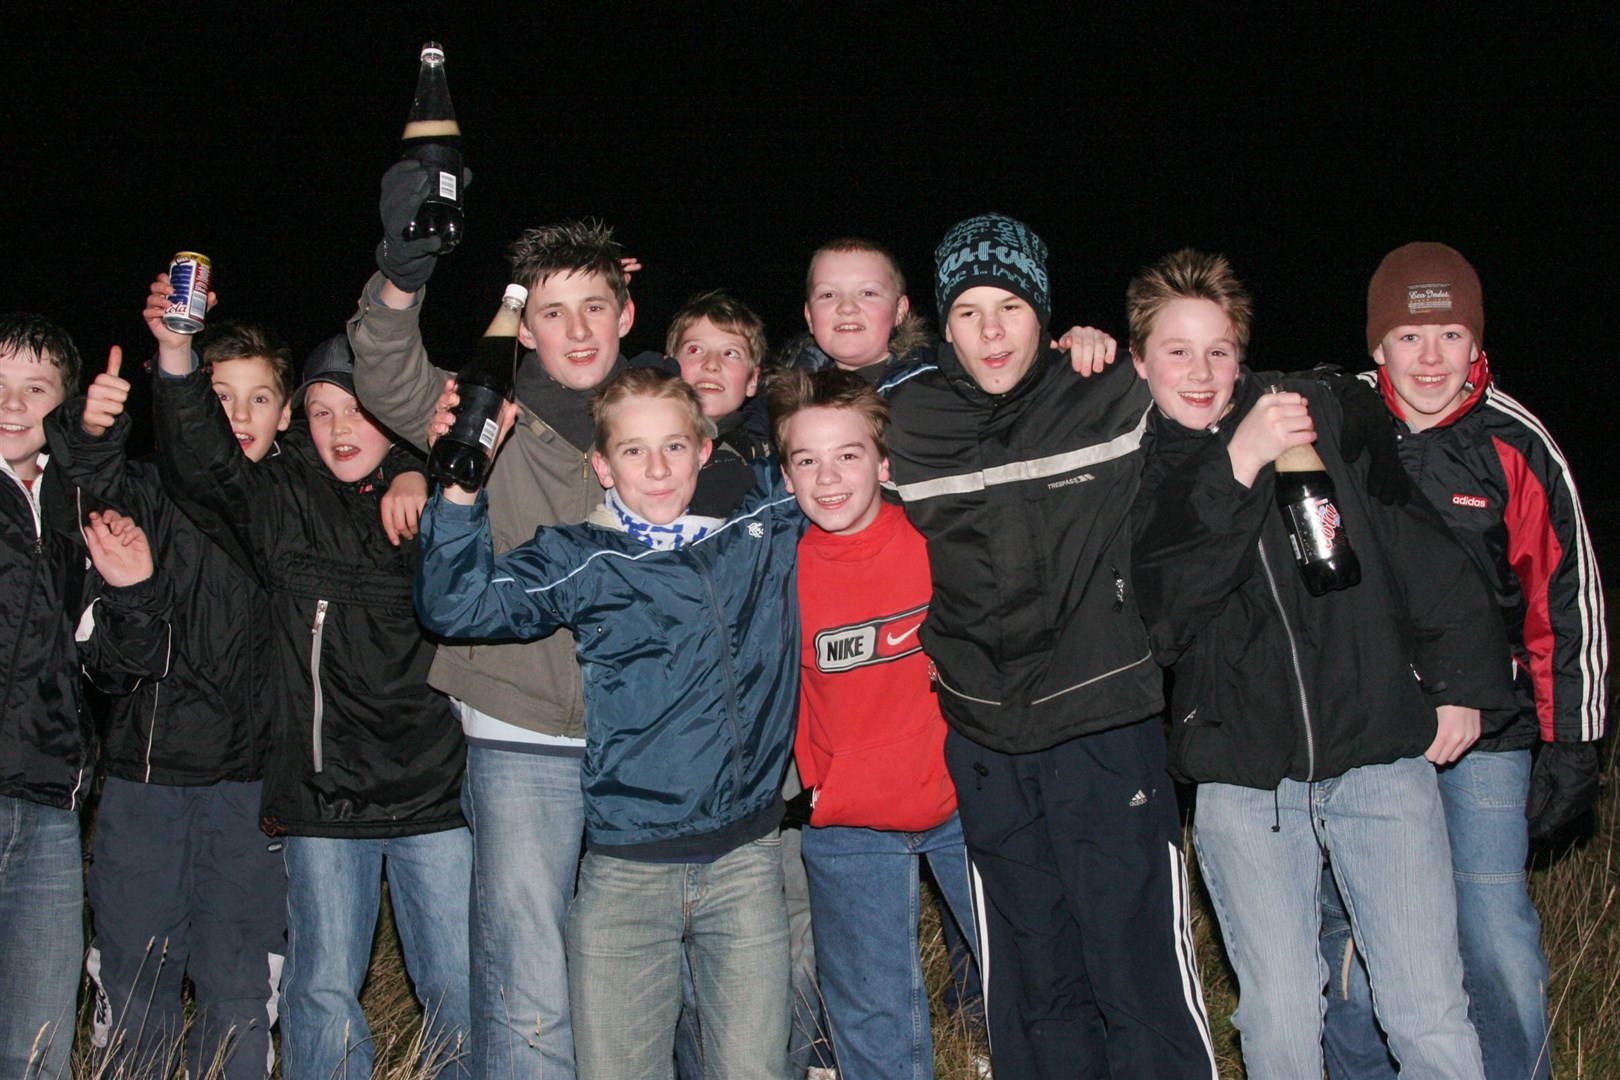 Local youngsters enjoying themselves in 2006.